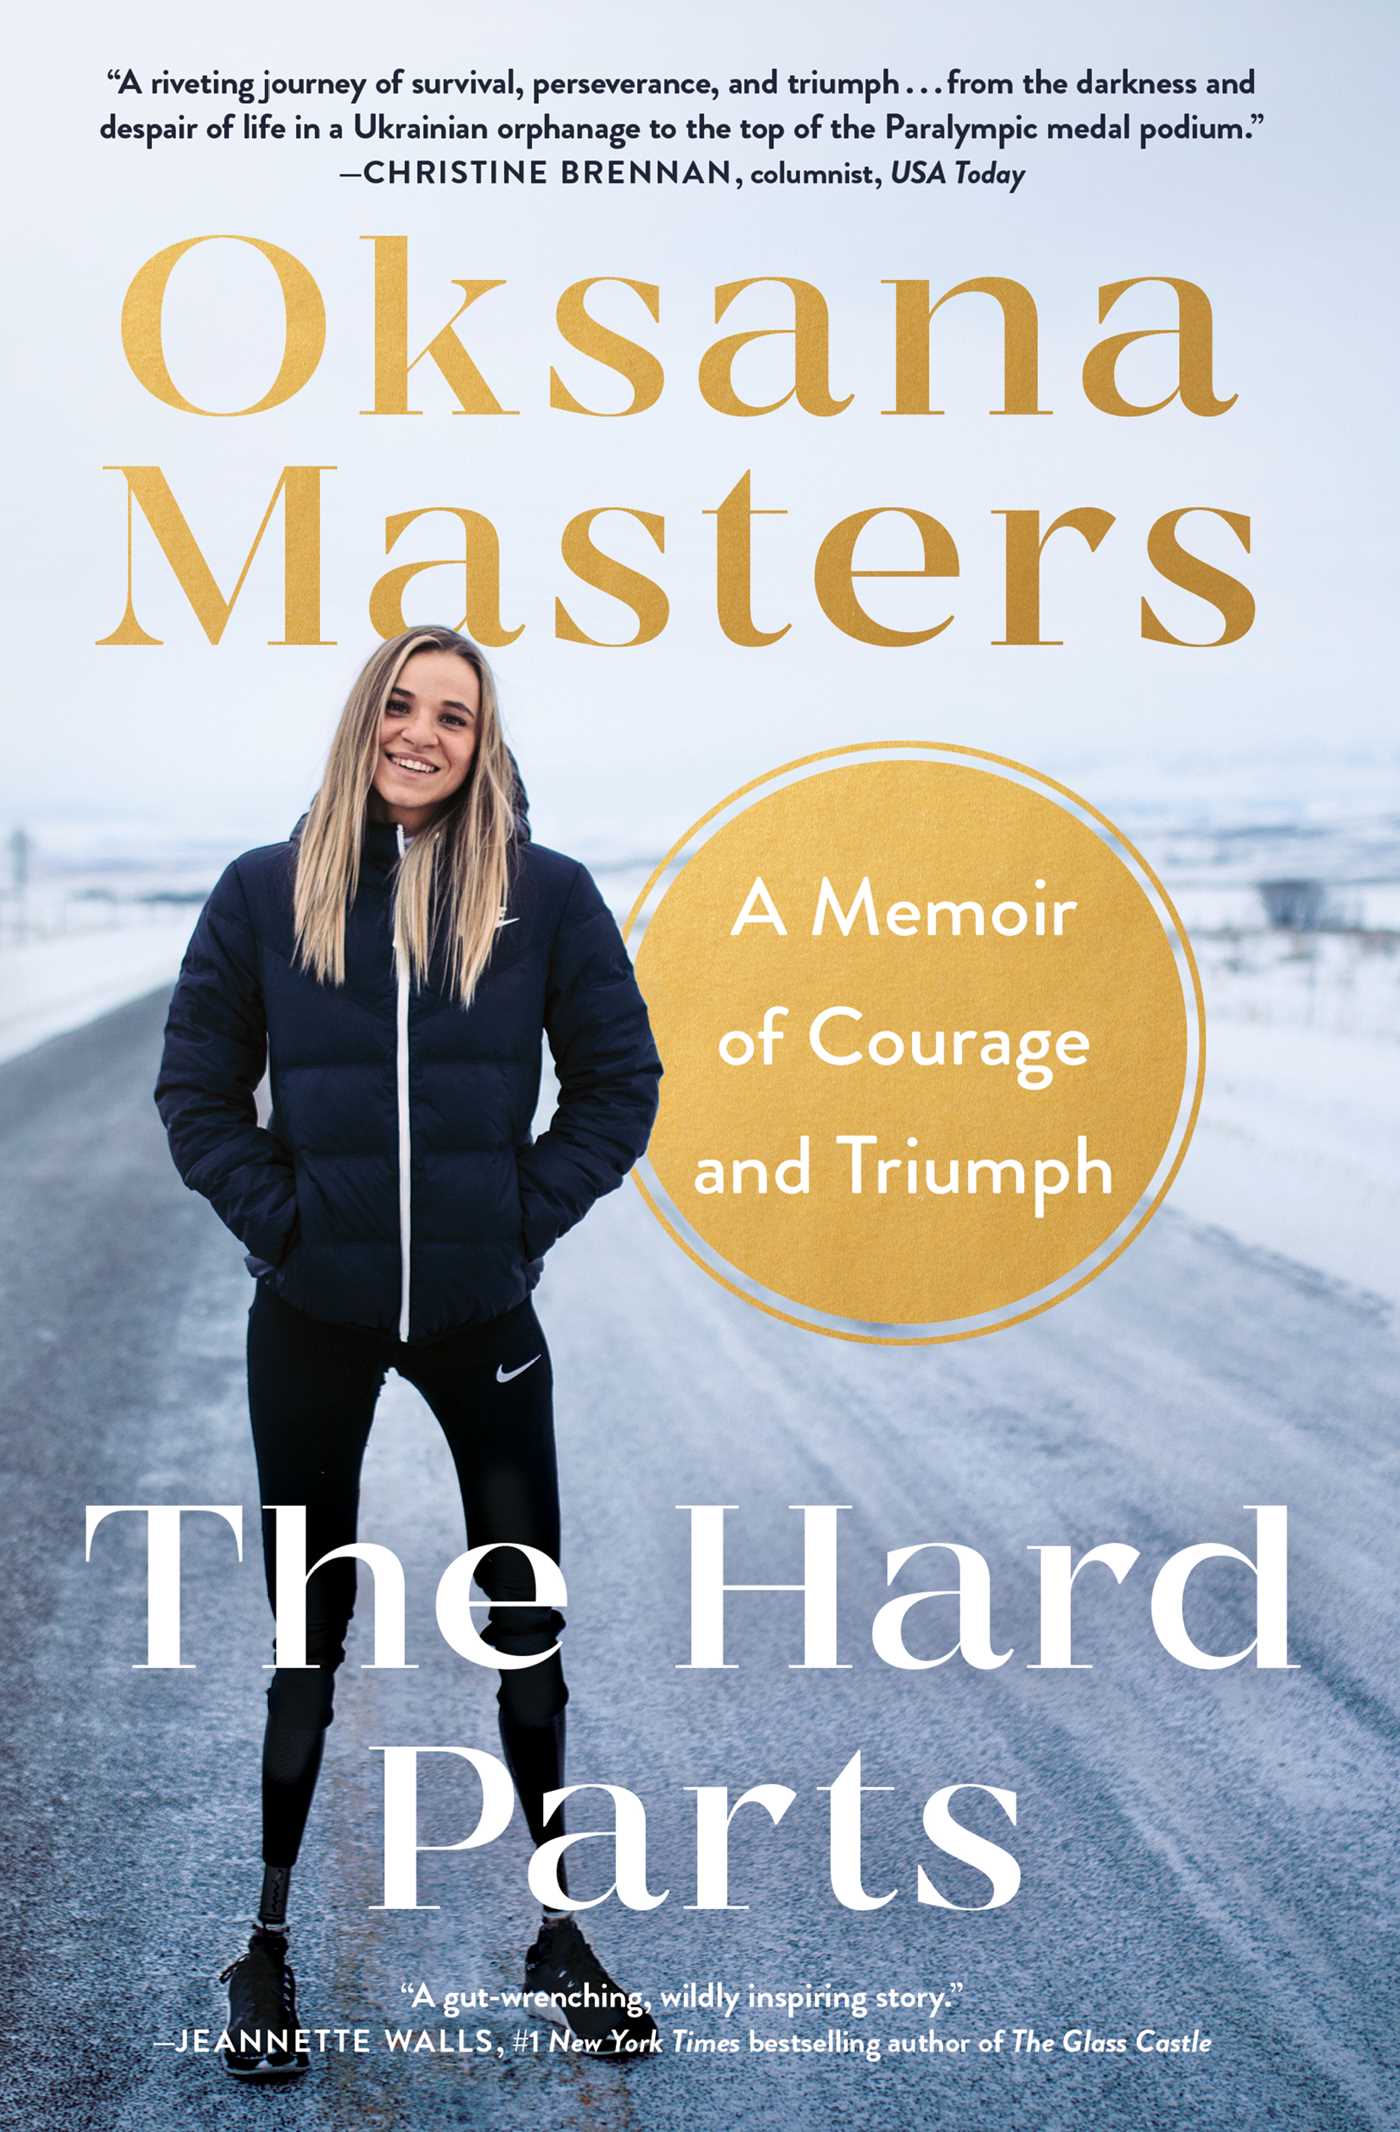 Link to The Hard Parts : A Memoir of Courage and Triumph by Oksana Masters in the catalog